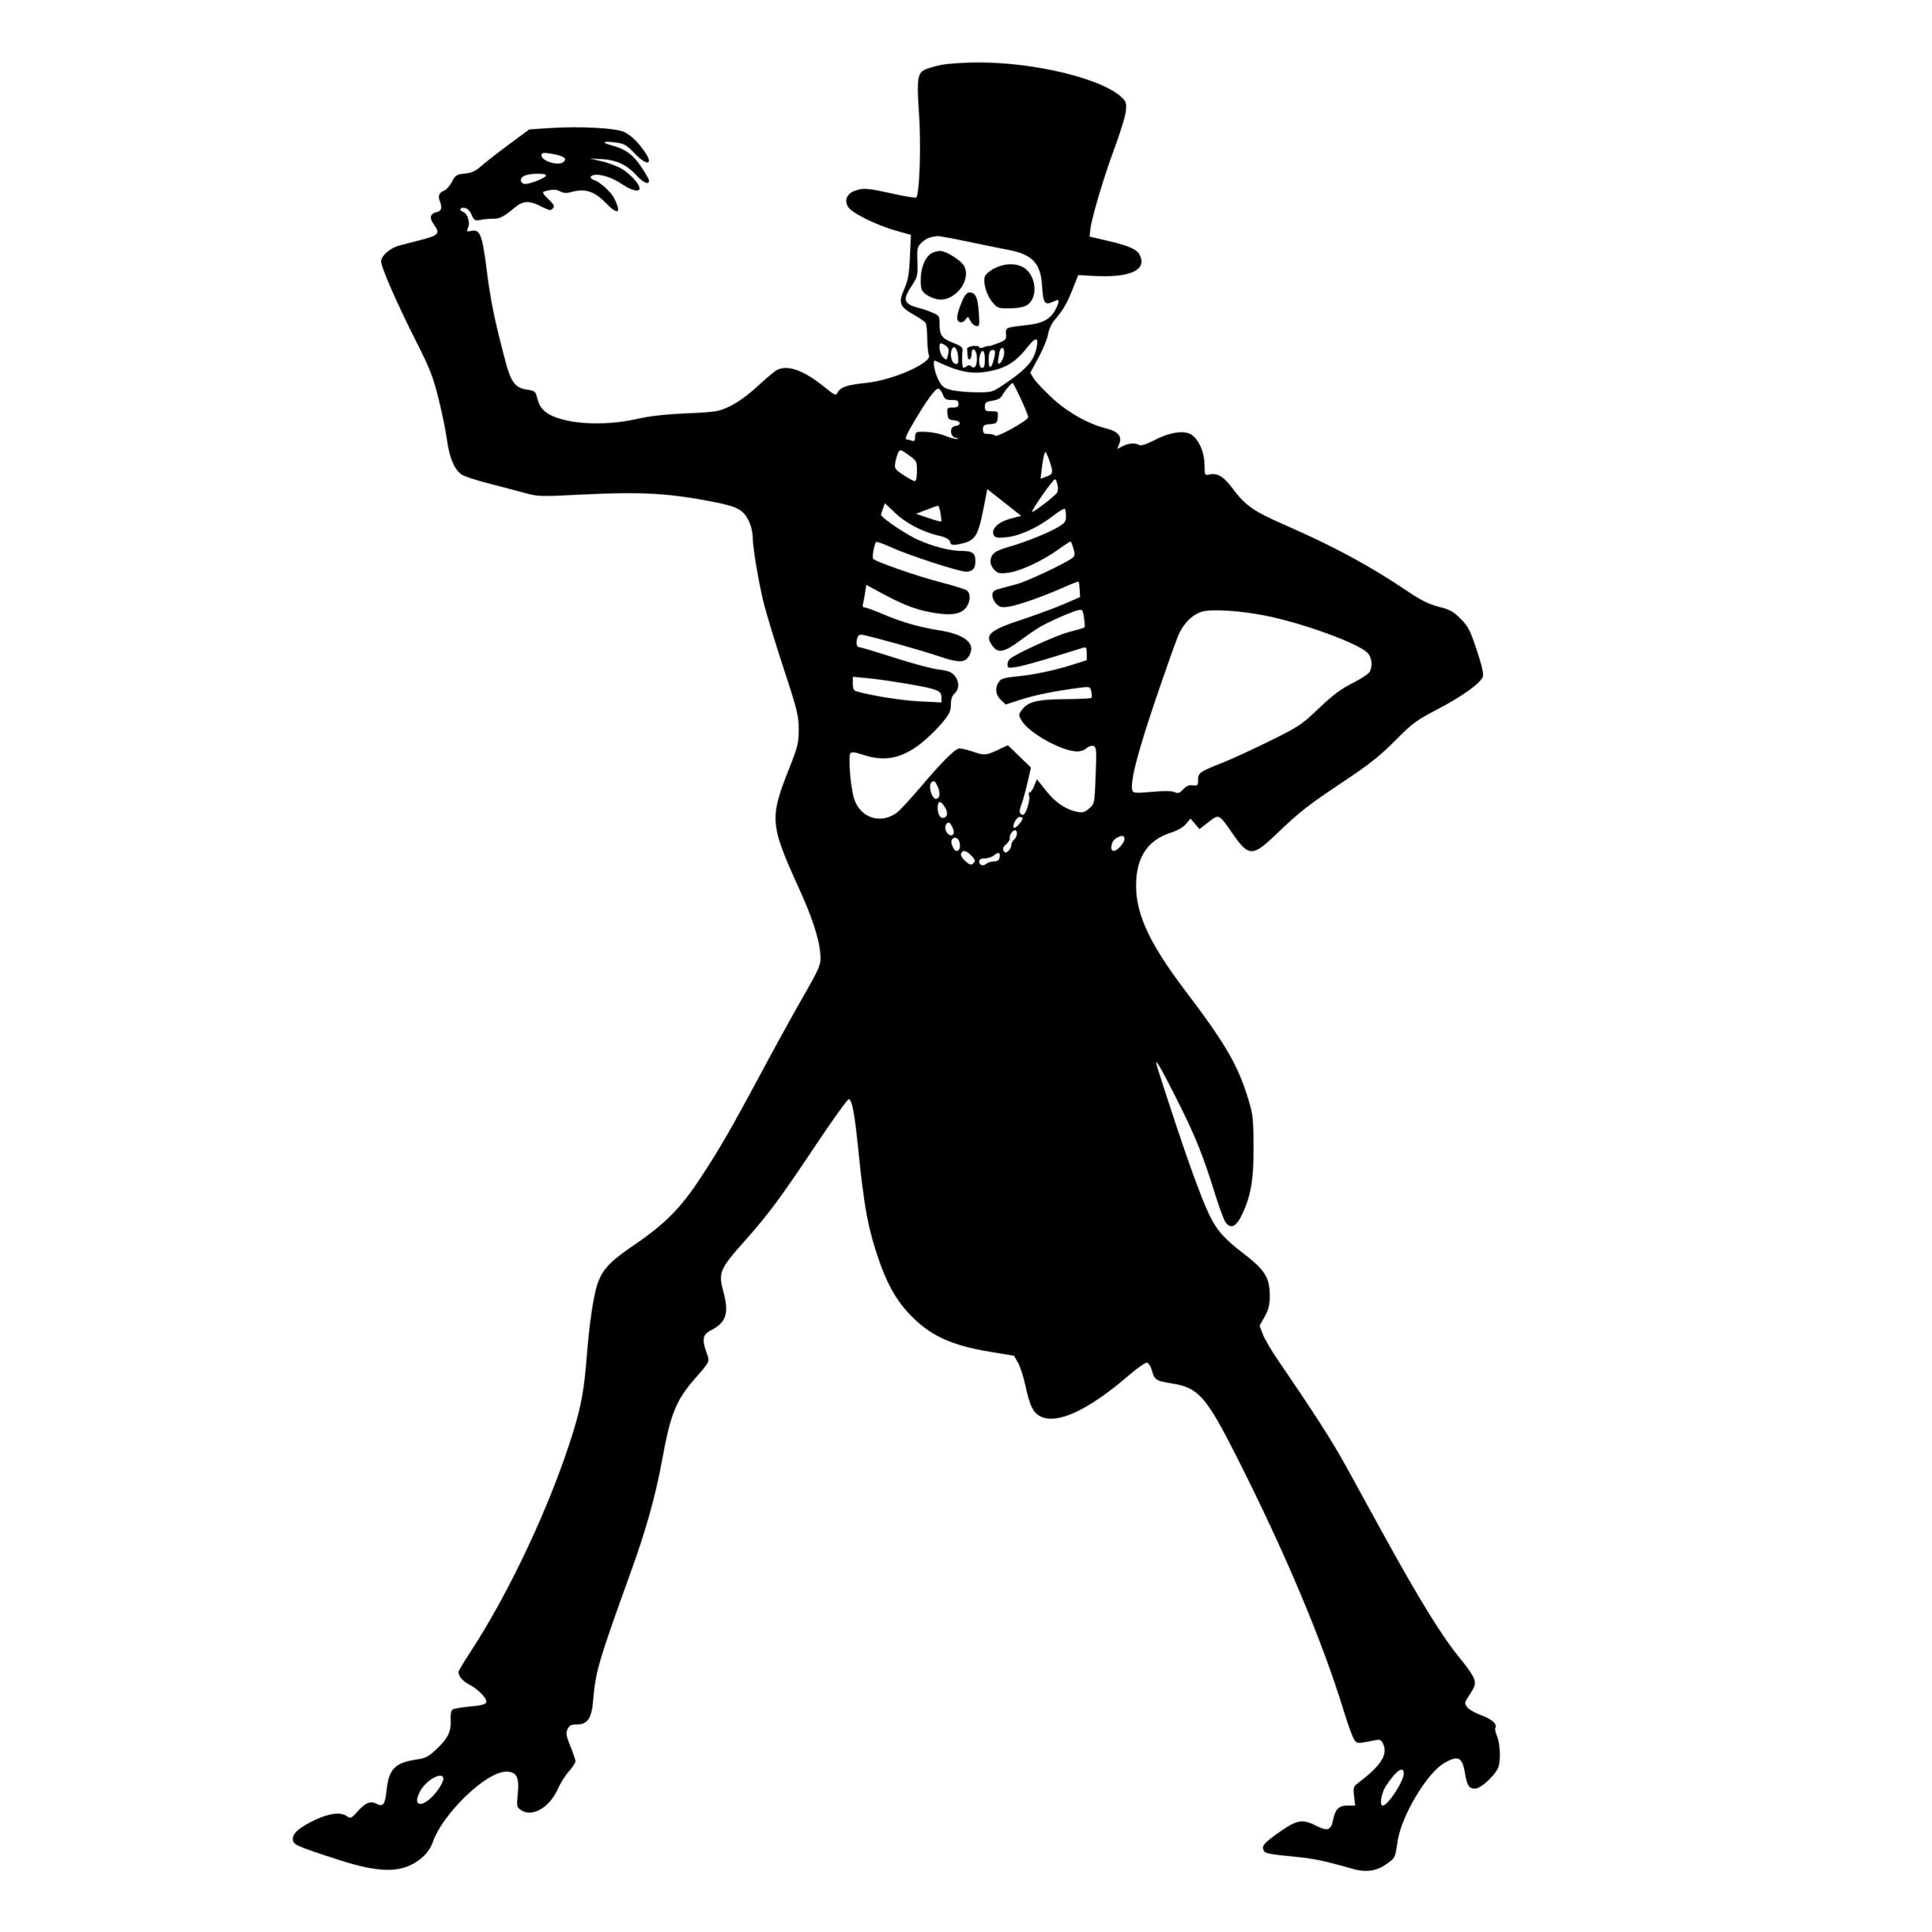 Tuxedoed Skeleton SVG File for Cricut, Silhouette, or Laser Machines